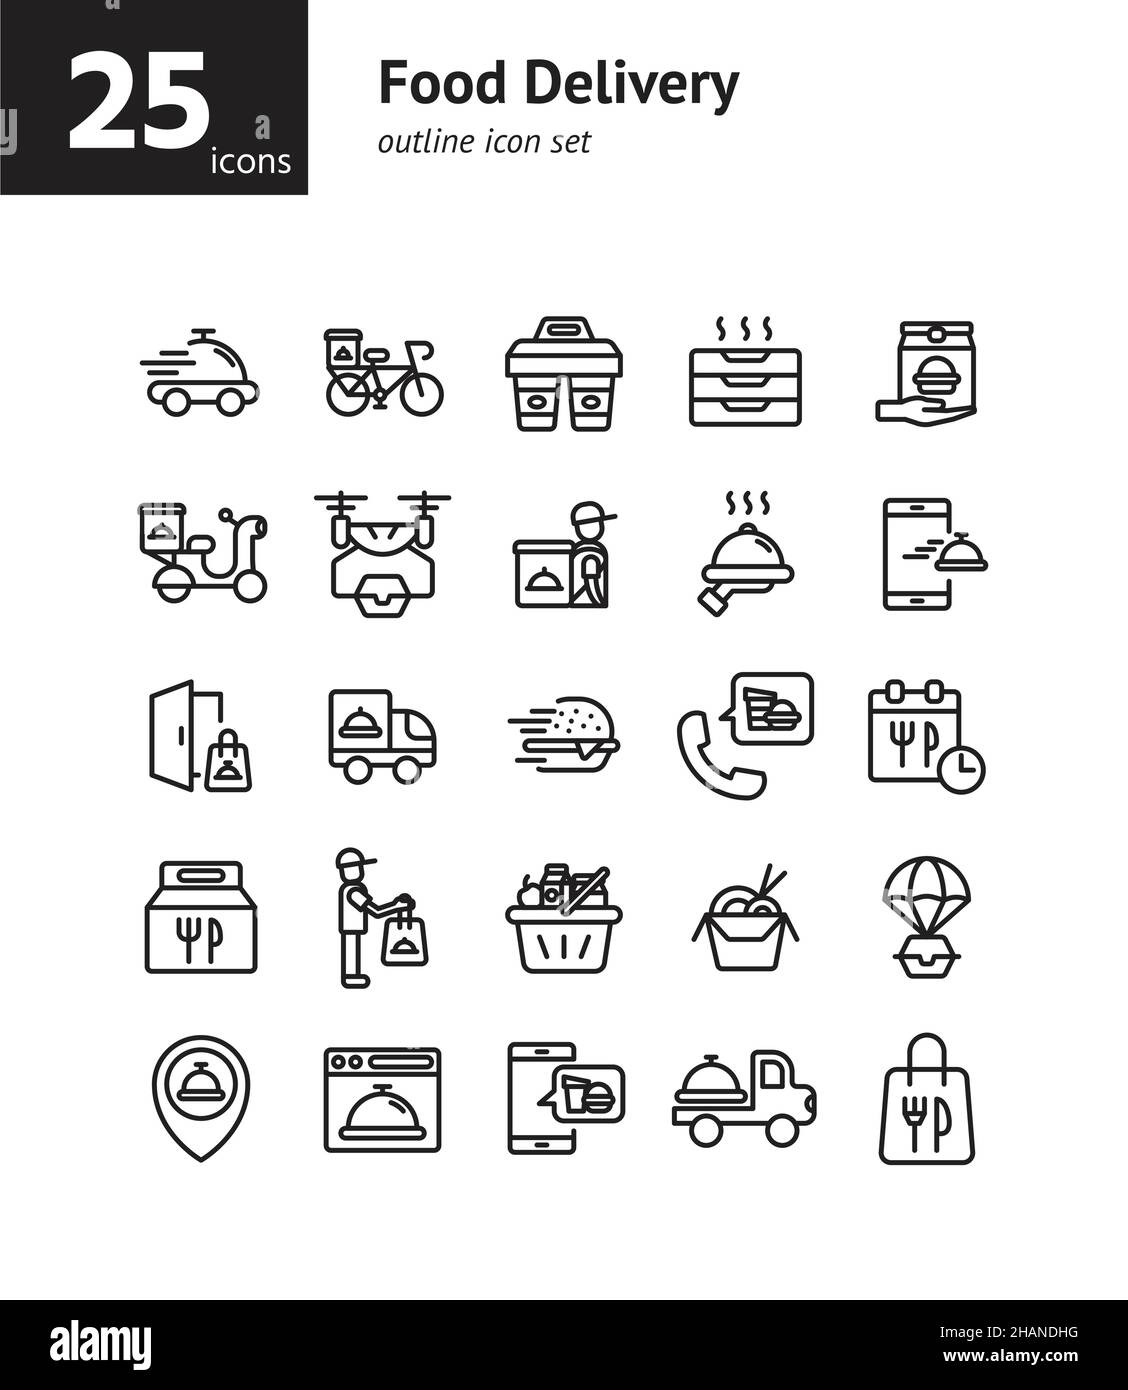 Food Delivery outline icon set. Vector and Illustration. Stock Vector